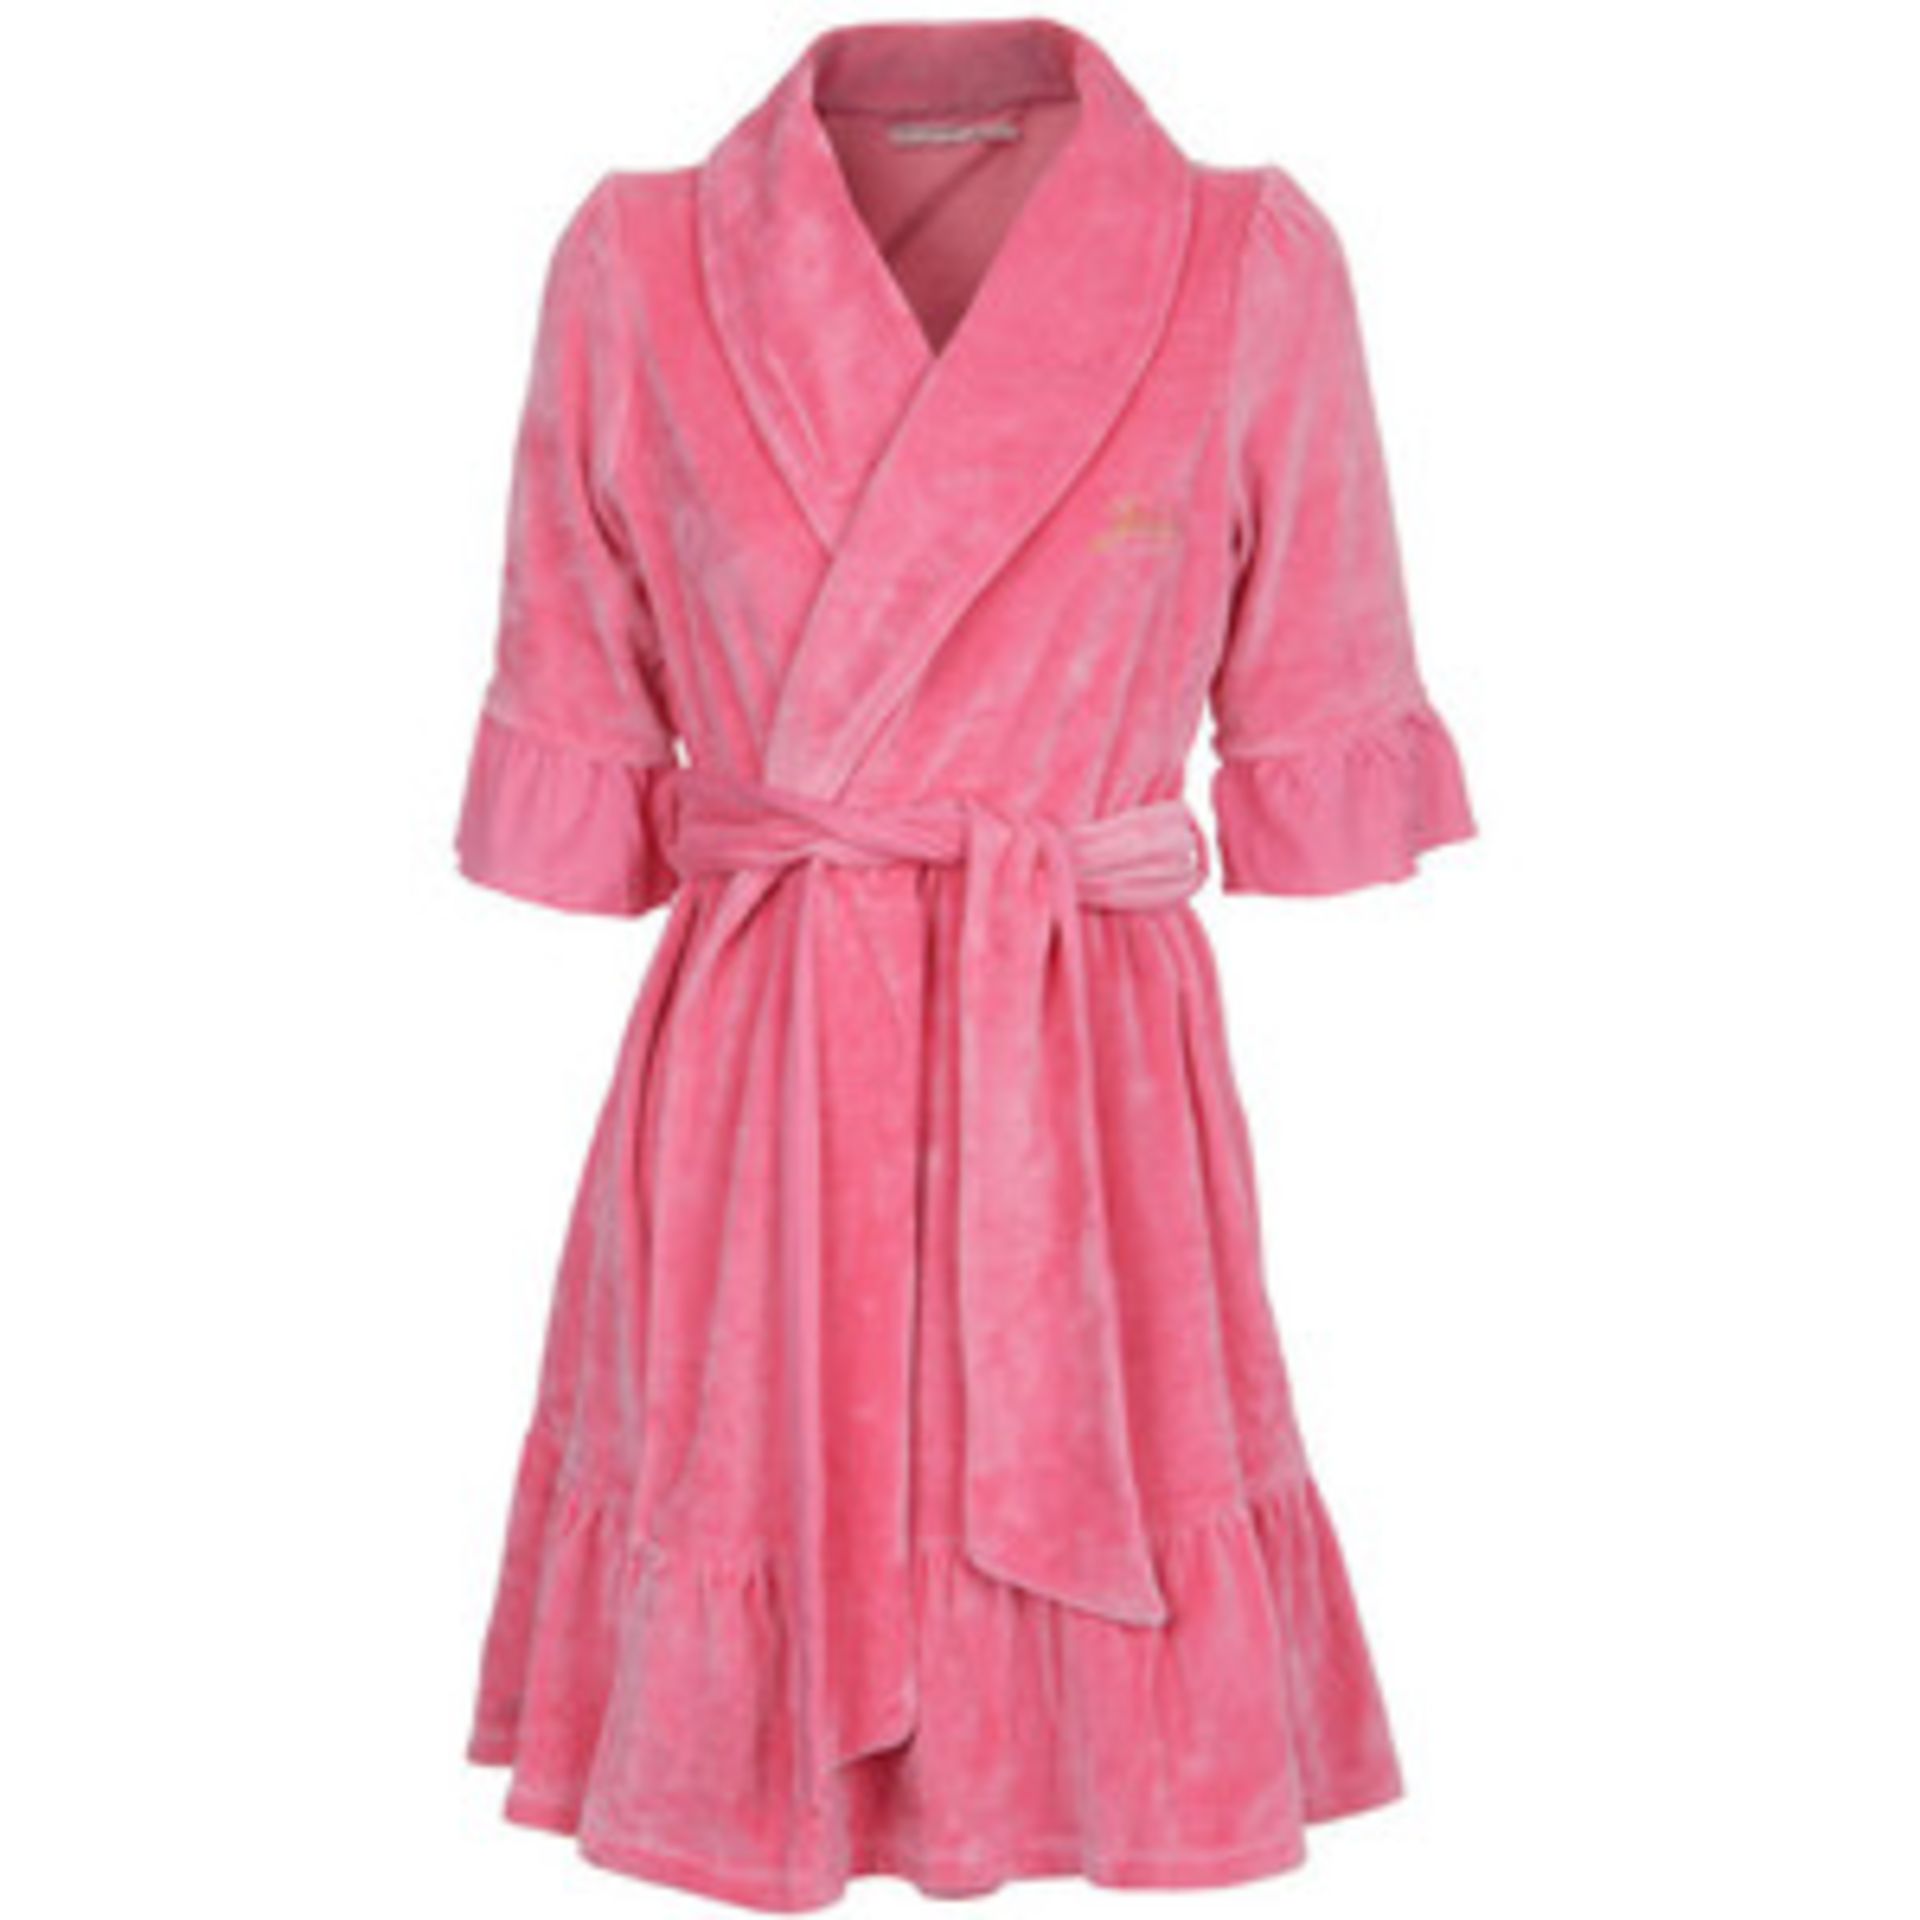 V Brand New 100% Cotton Ladies Majestic Bathrobe In Pink RRP29.99